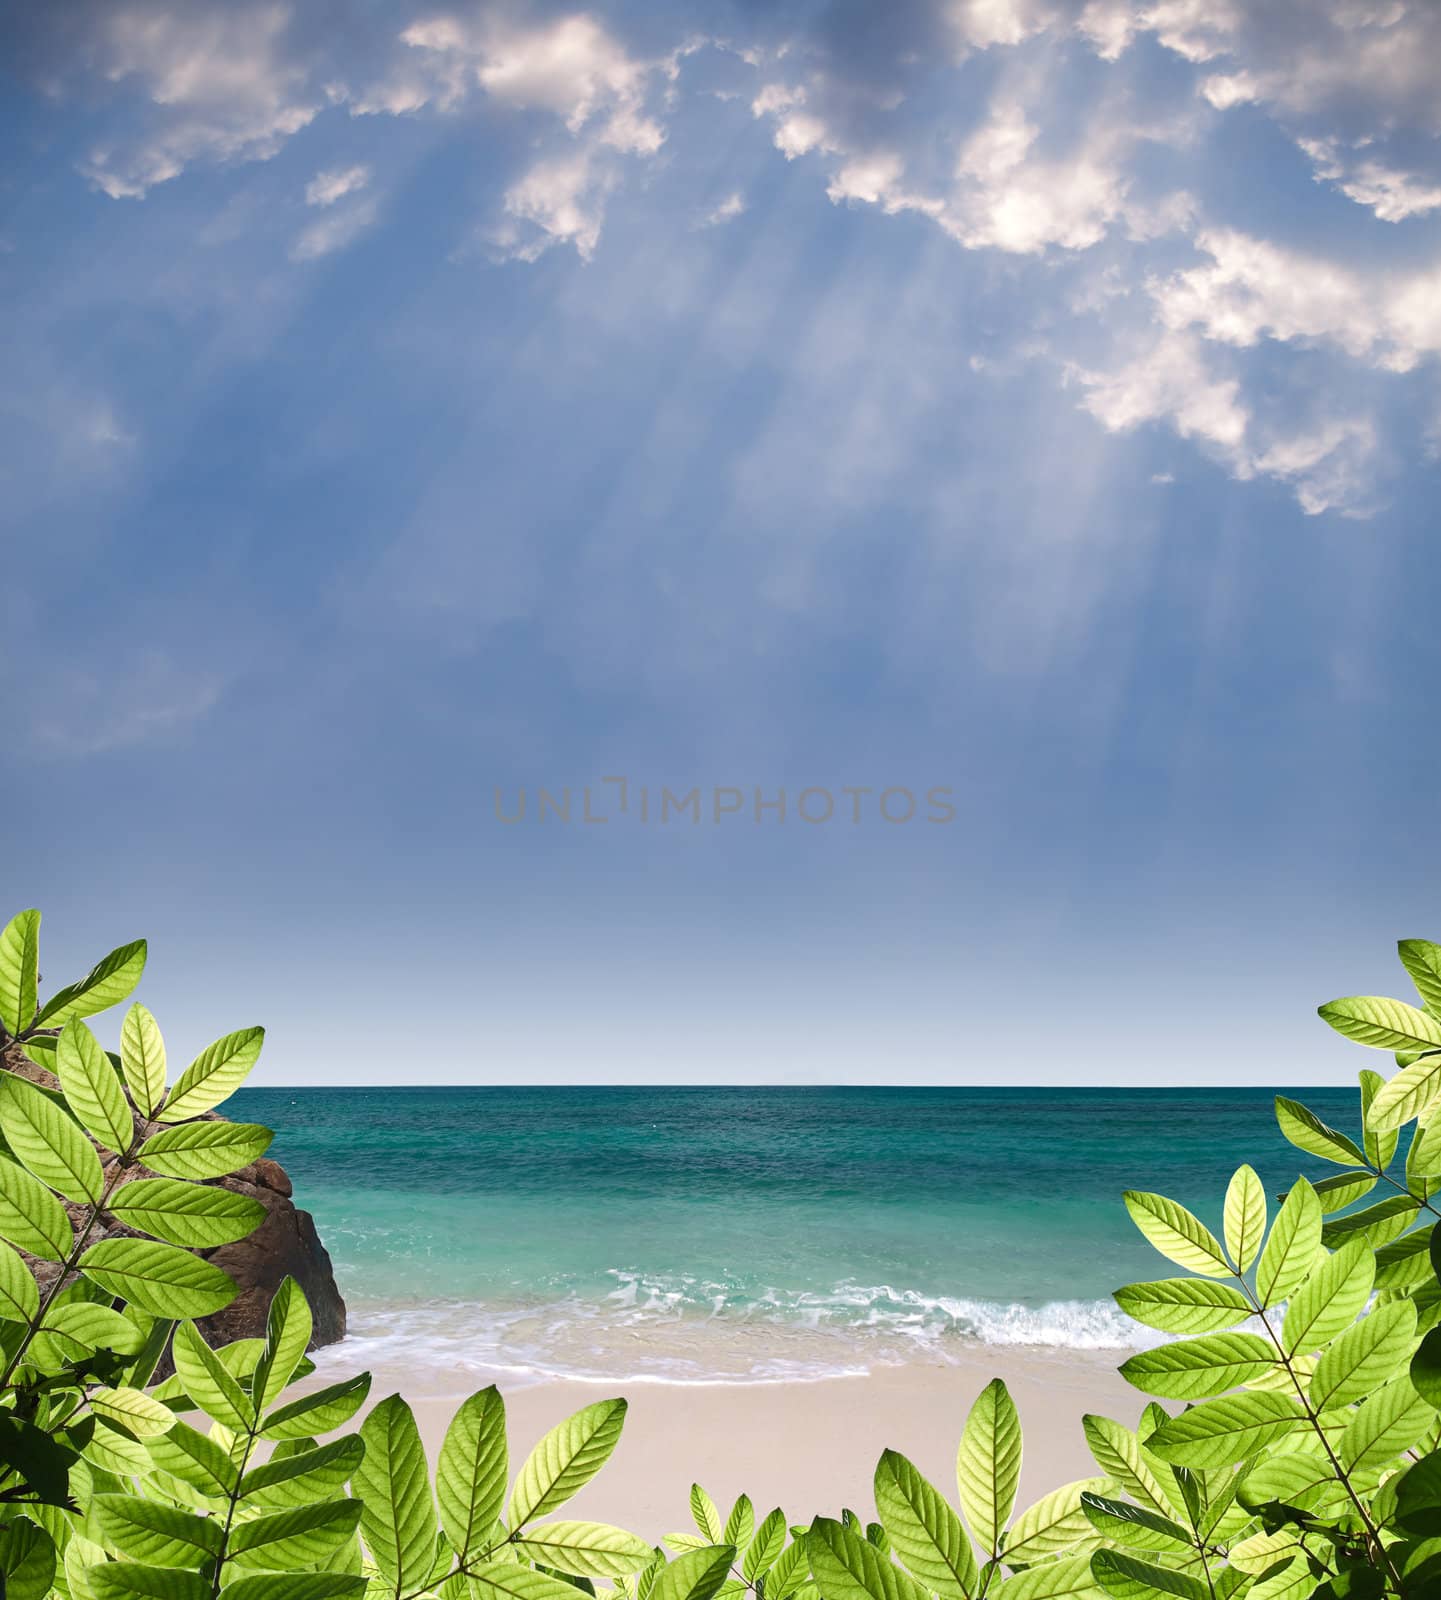 Summer paradise view with green foliage, beautiful beach, emerald color sea and rays from heaven